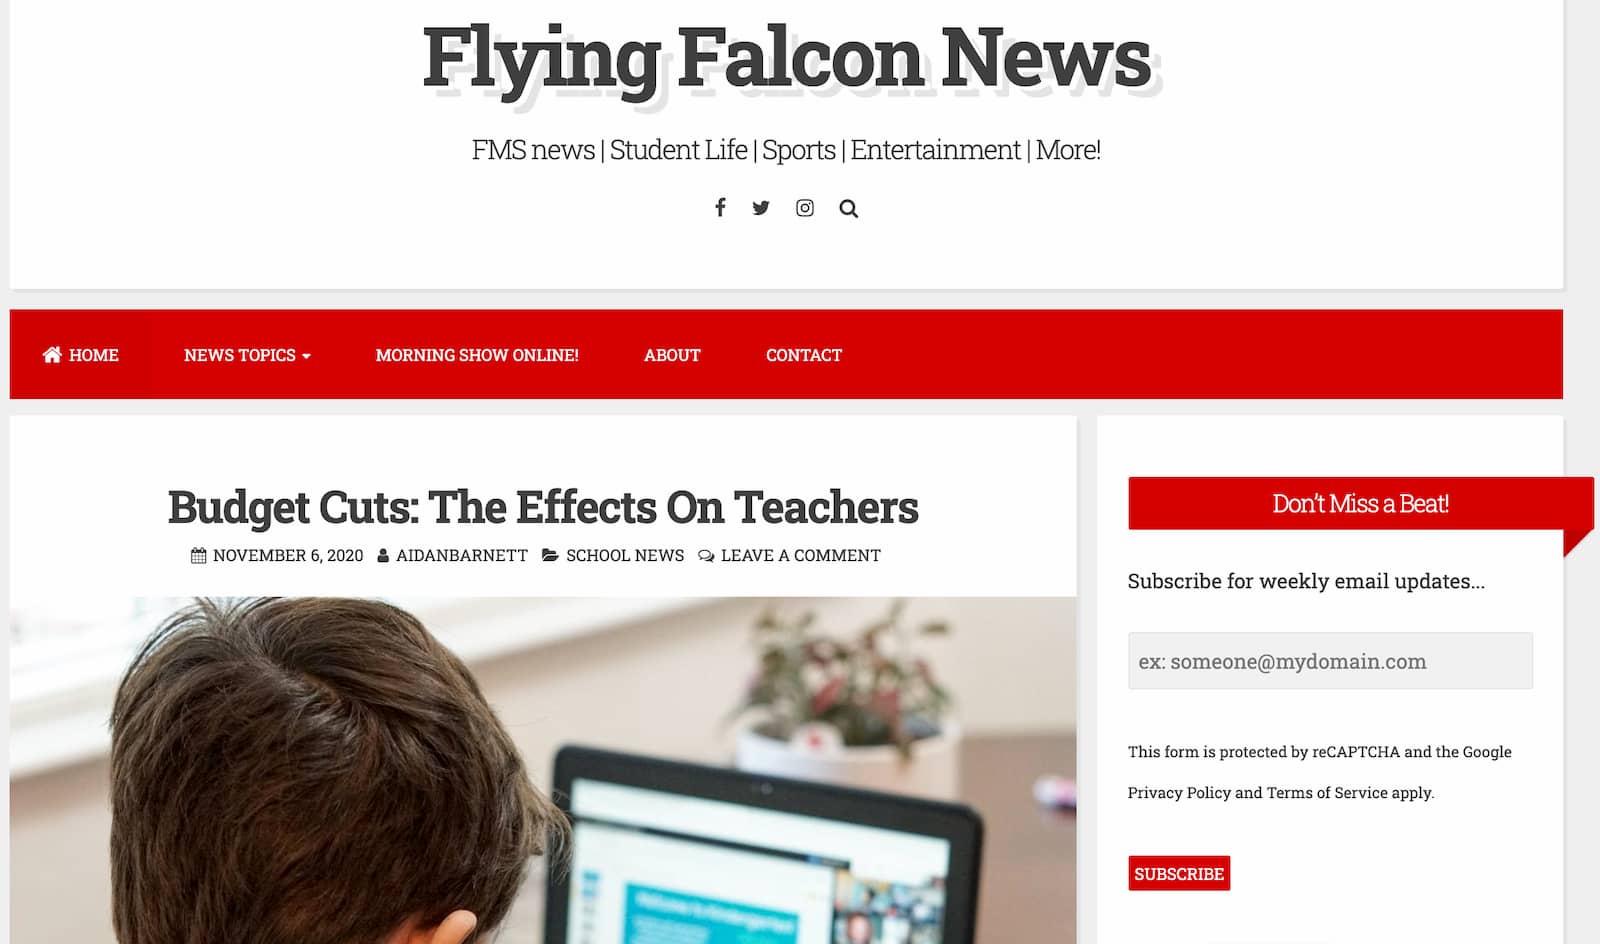 A screenshot of FarnellNews.com website with read headers and featured image of boy student using a latptop.